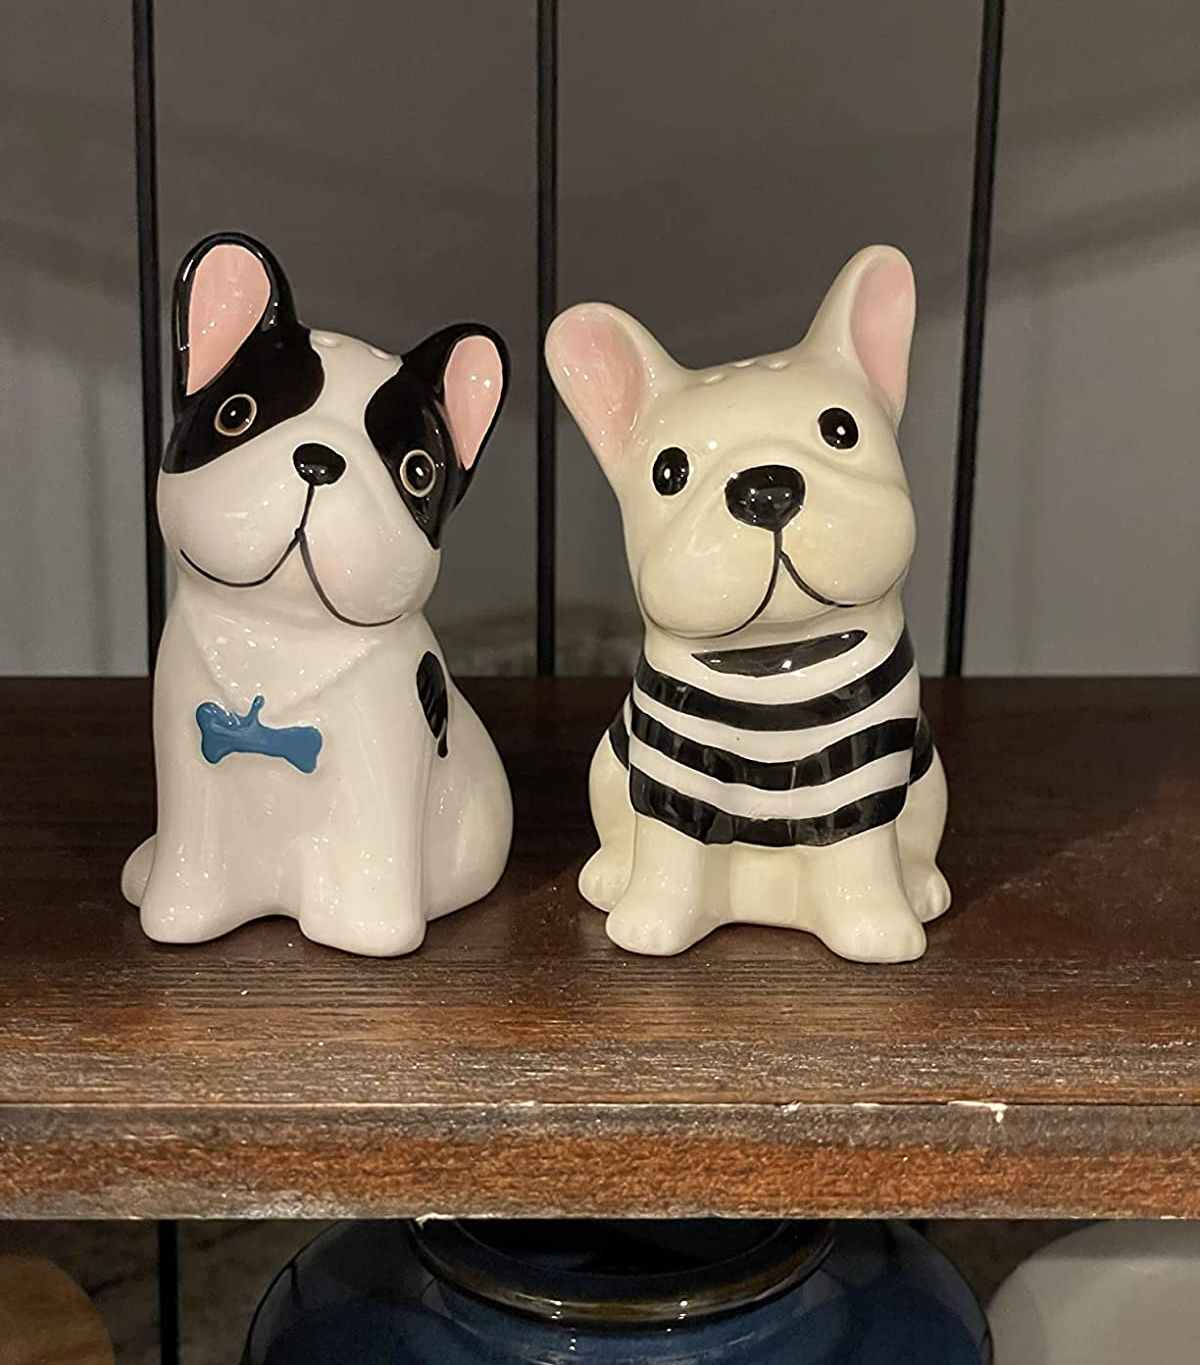 salt and pepper shaker set shaped like two frenchies, one black and white and one blonde in a striped shirt